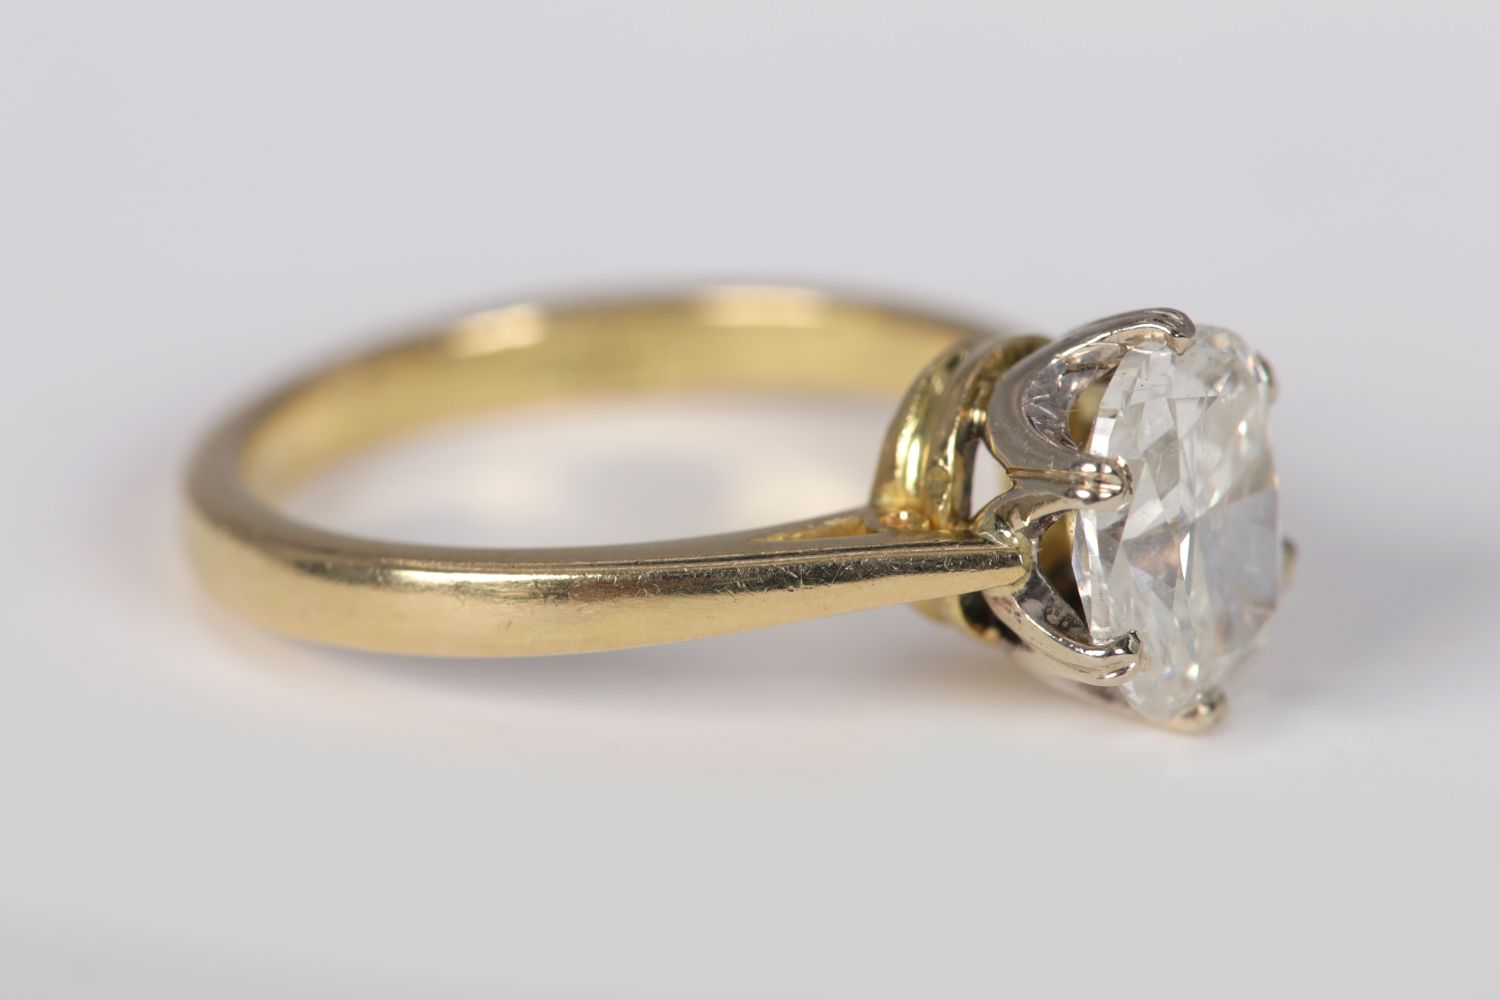 18K GOLD & DIAMOND SOLITAIRE RING - Image 2 of 3